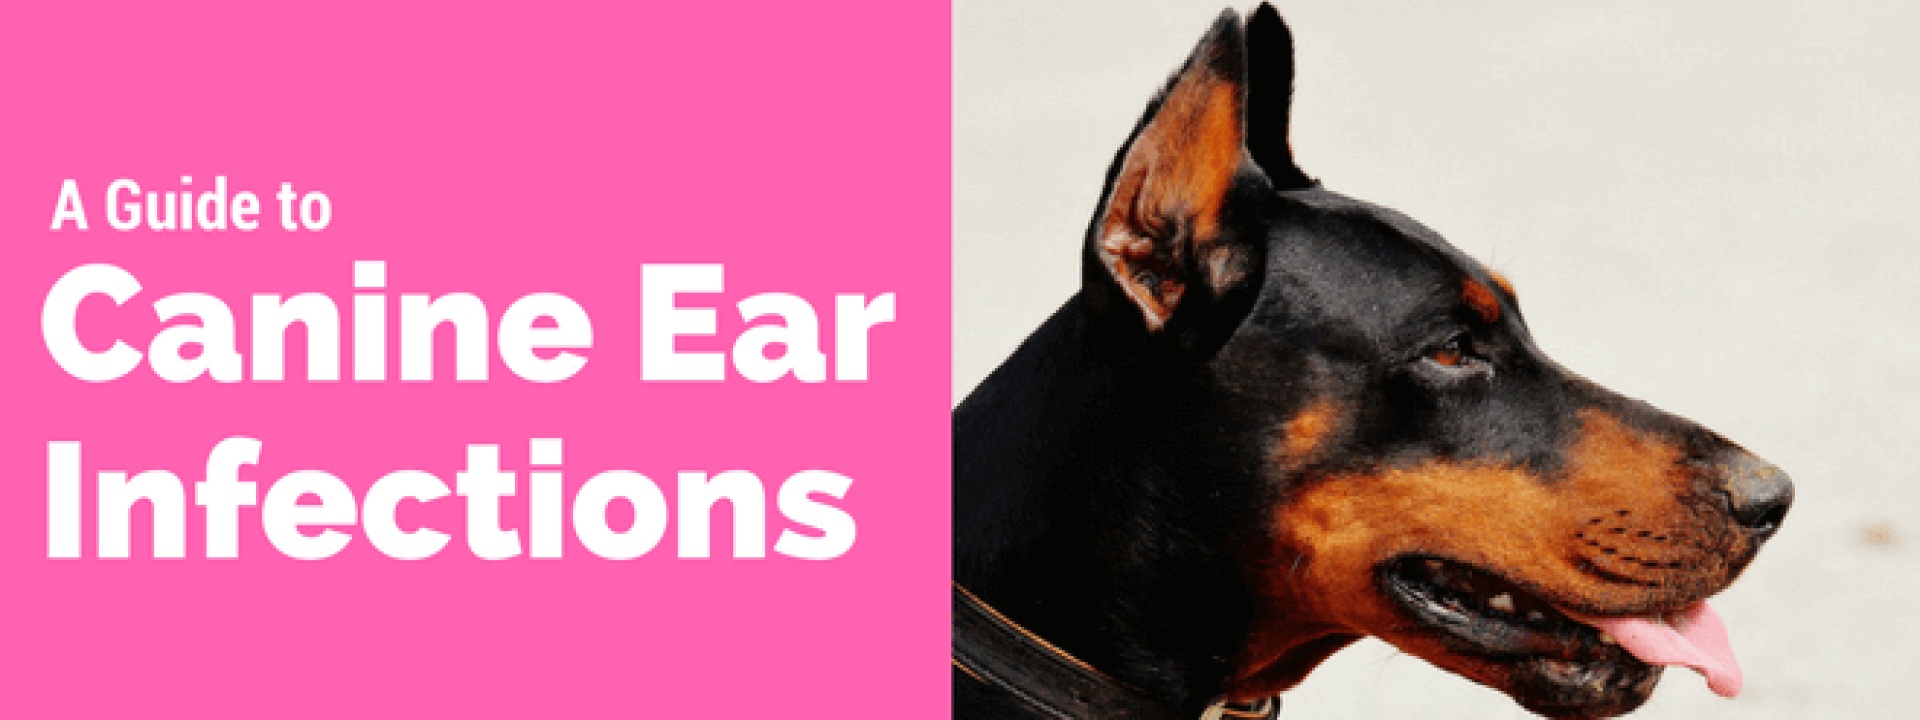 blog-title-a-guide-to-canine-ear-infections.png